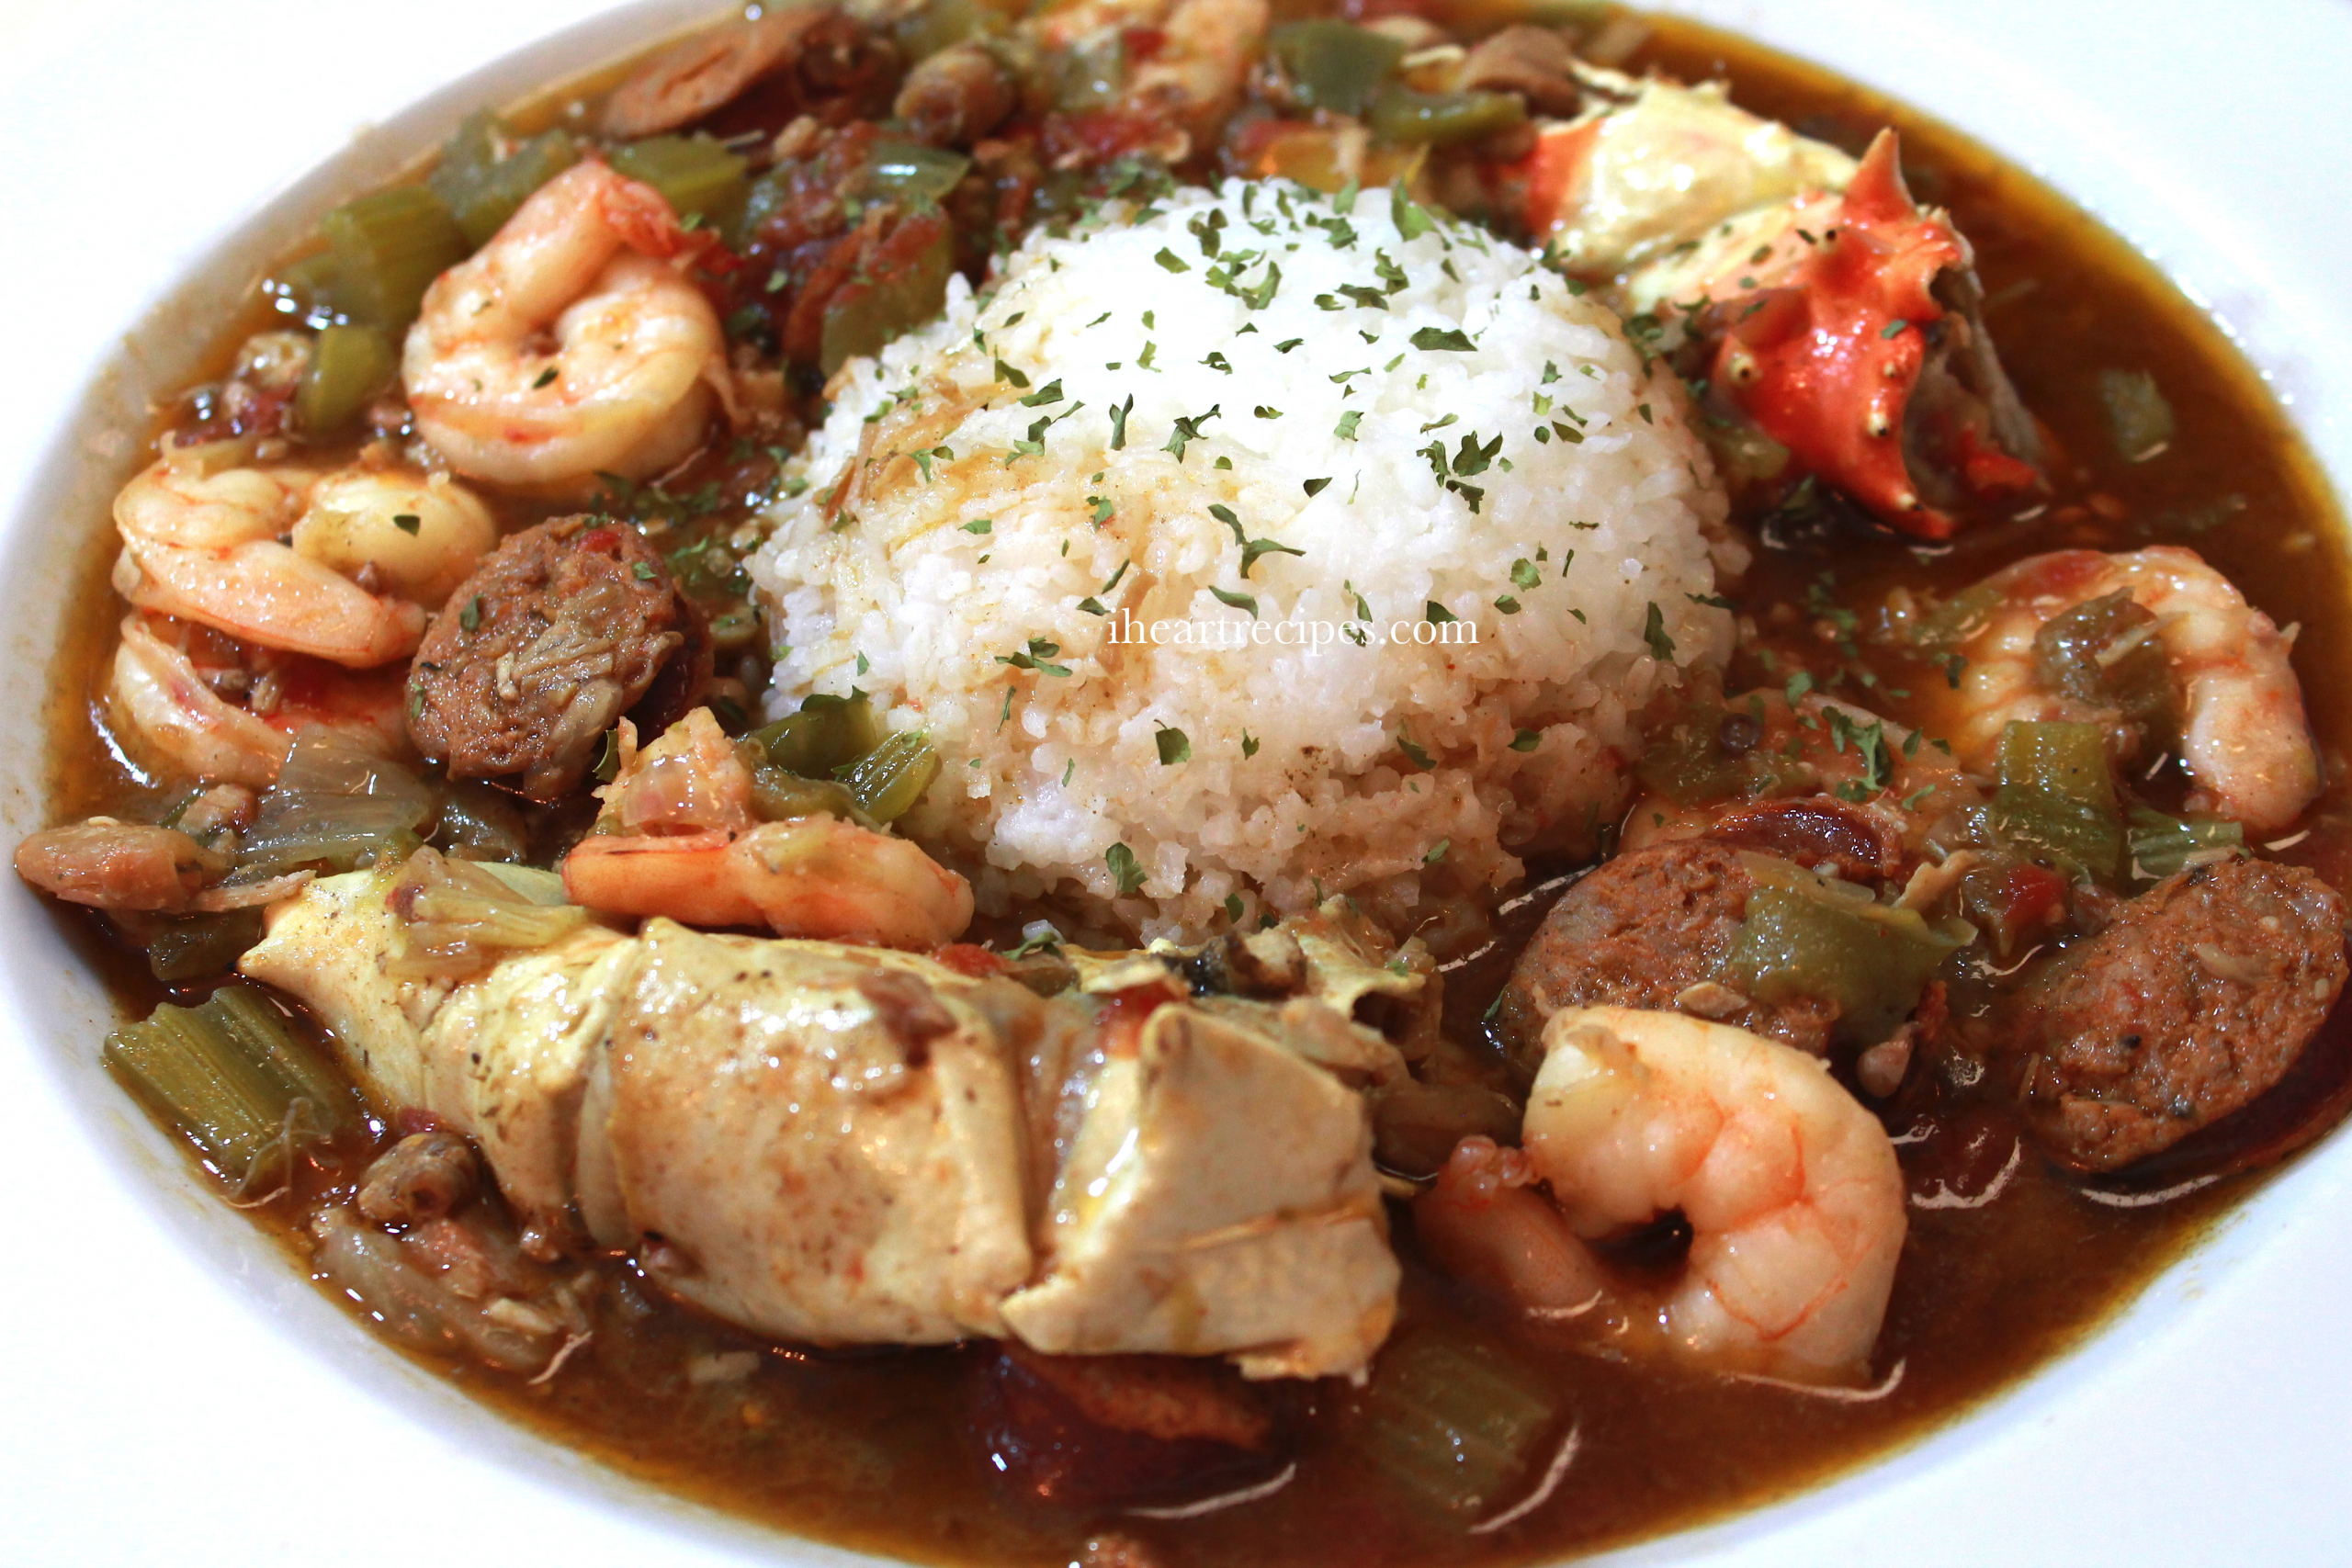 Gumbo Recipe Seafood Chicken And Sausage
 Seafood Chicken & Andouille Sausage Gumbo